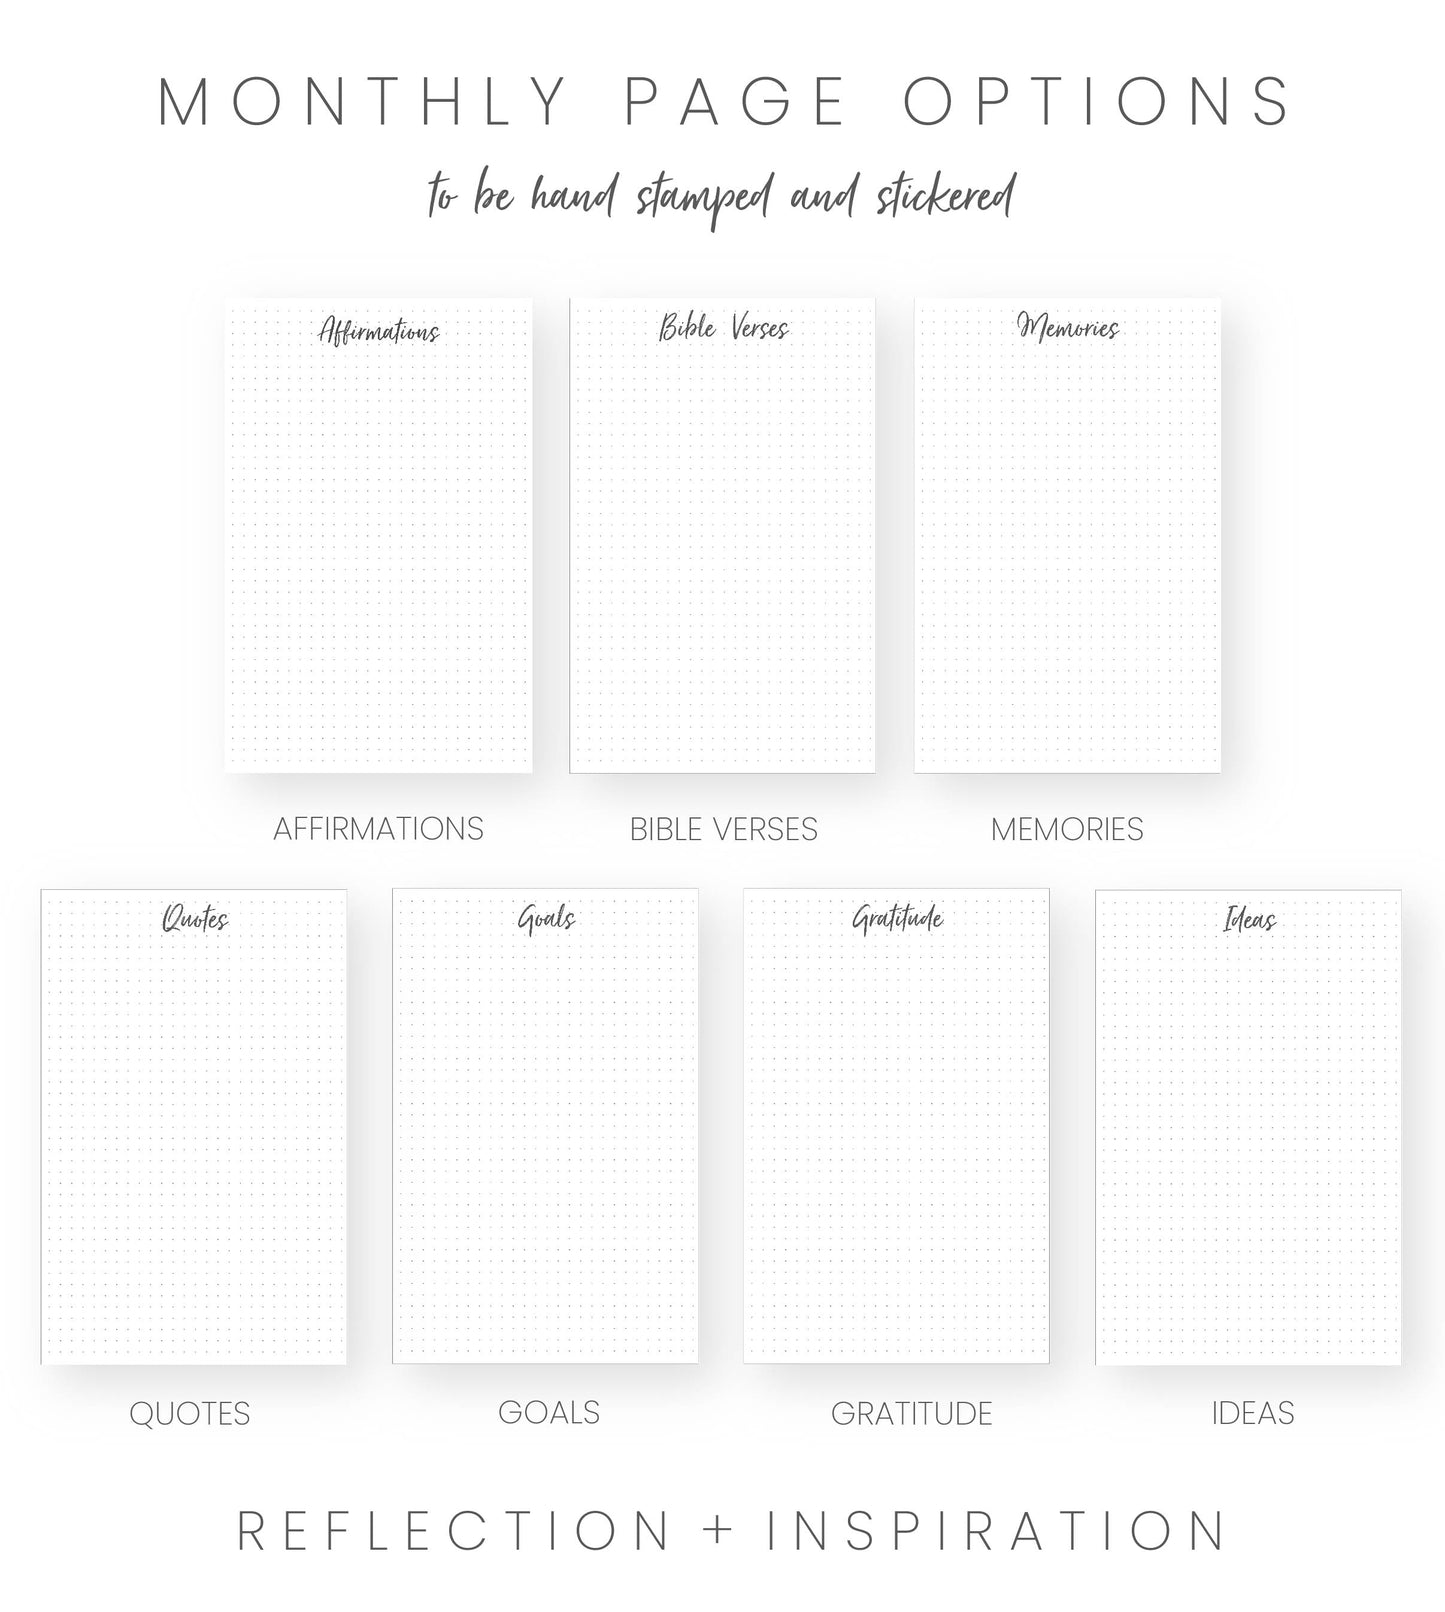 2023-24 Personalized Illustrated Planner Gingham